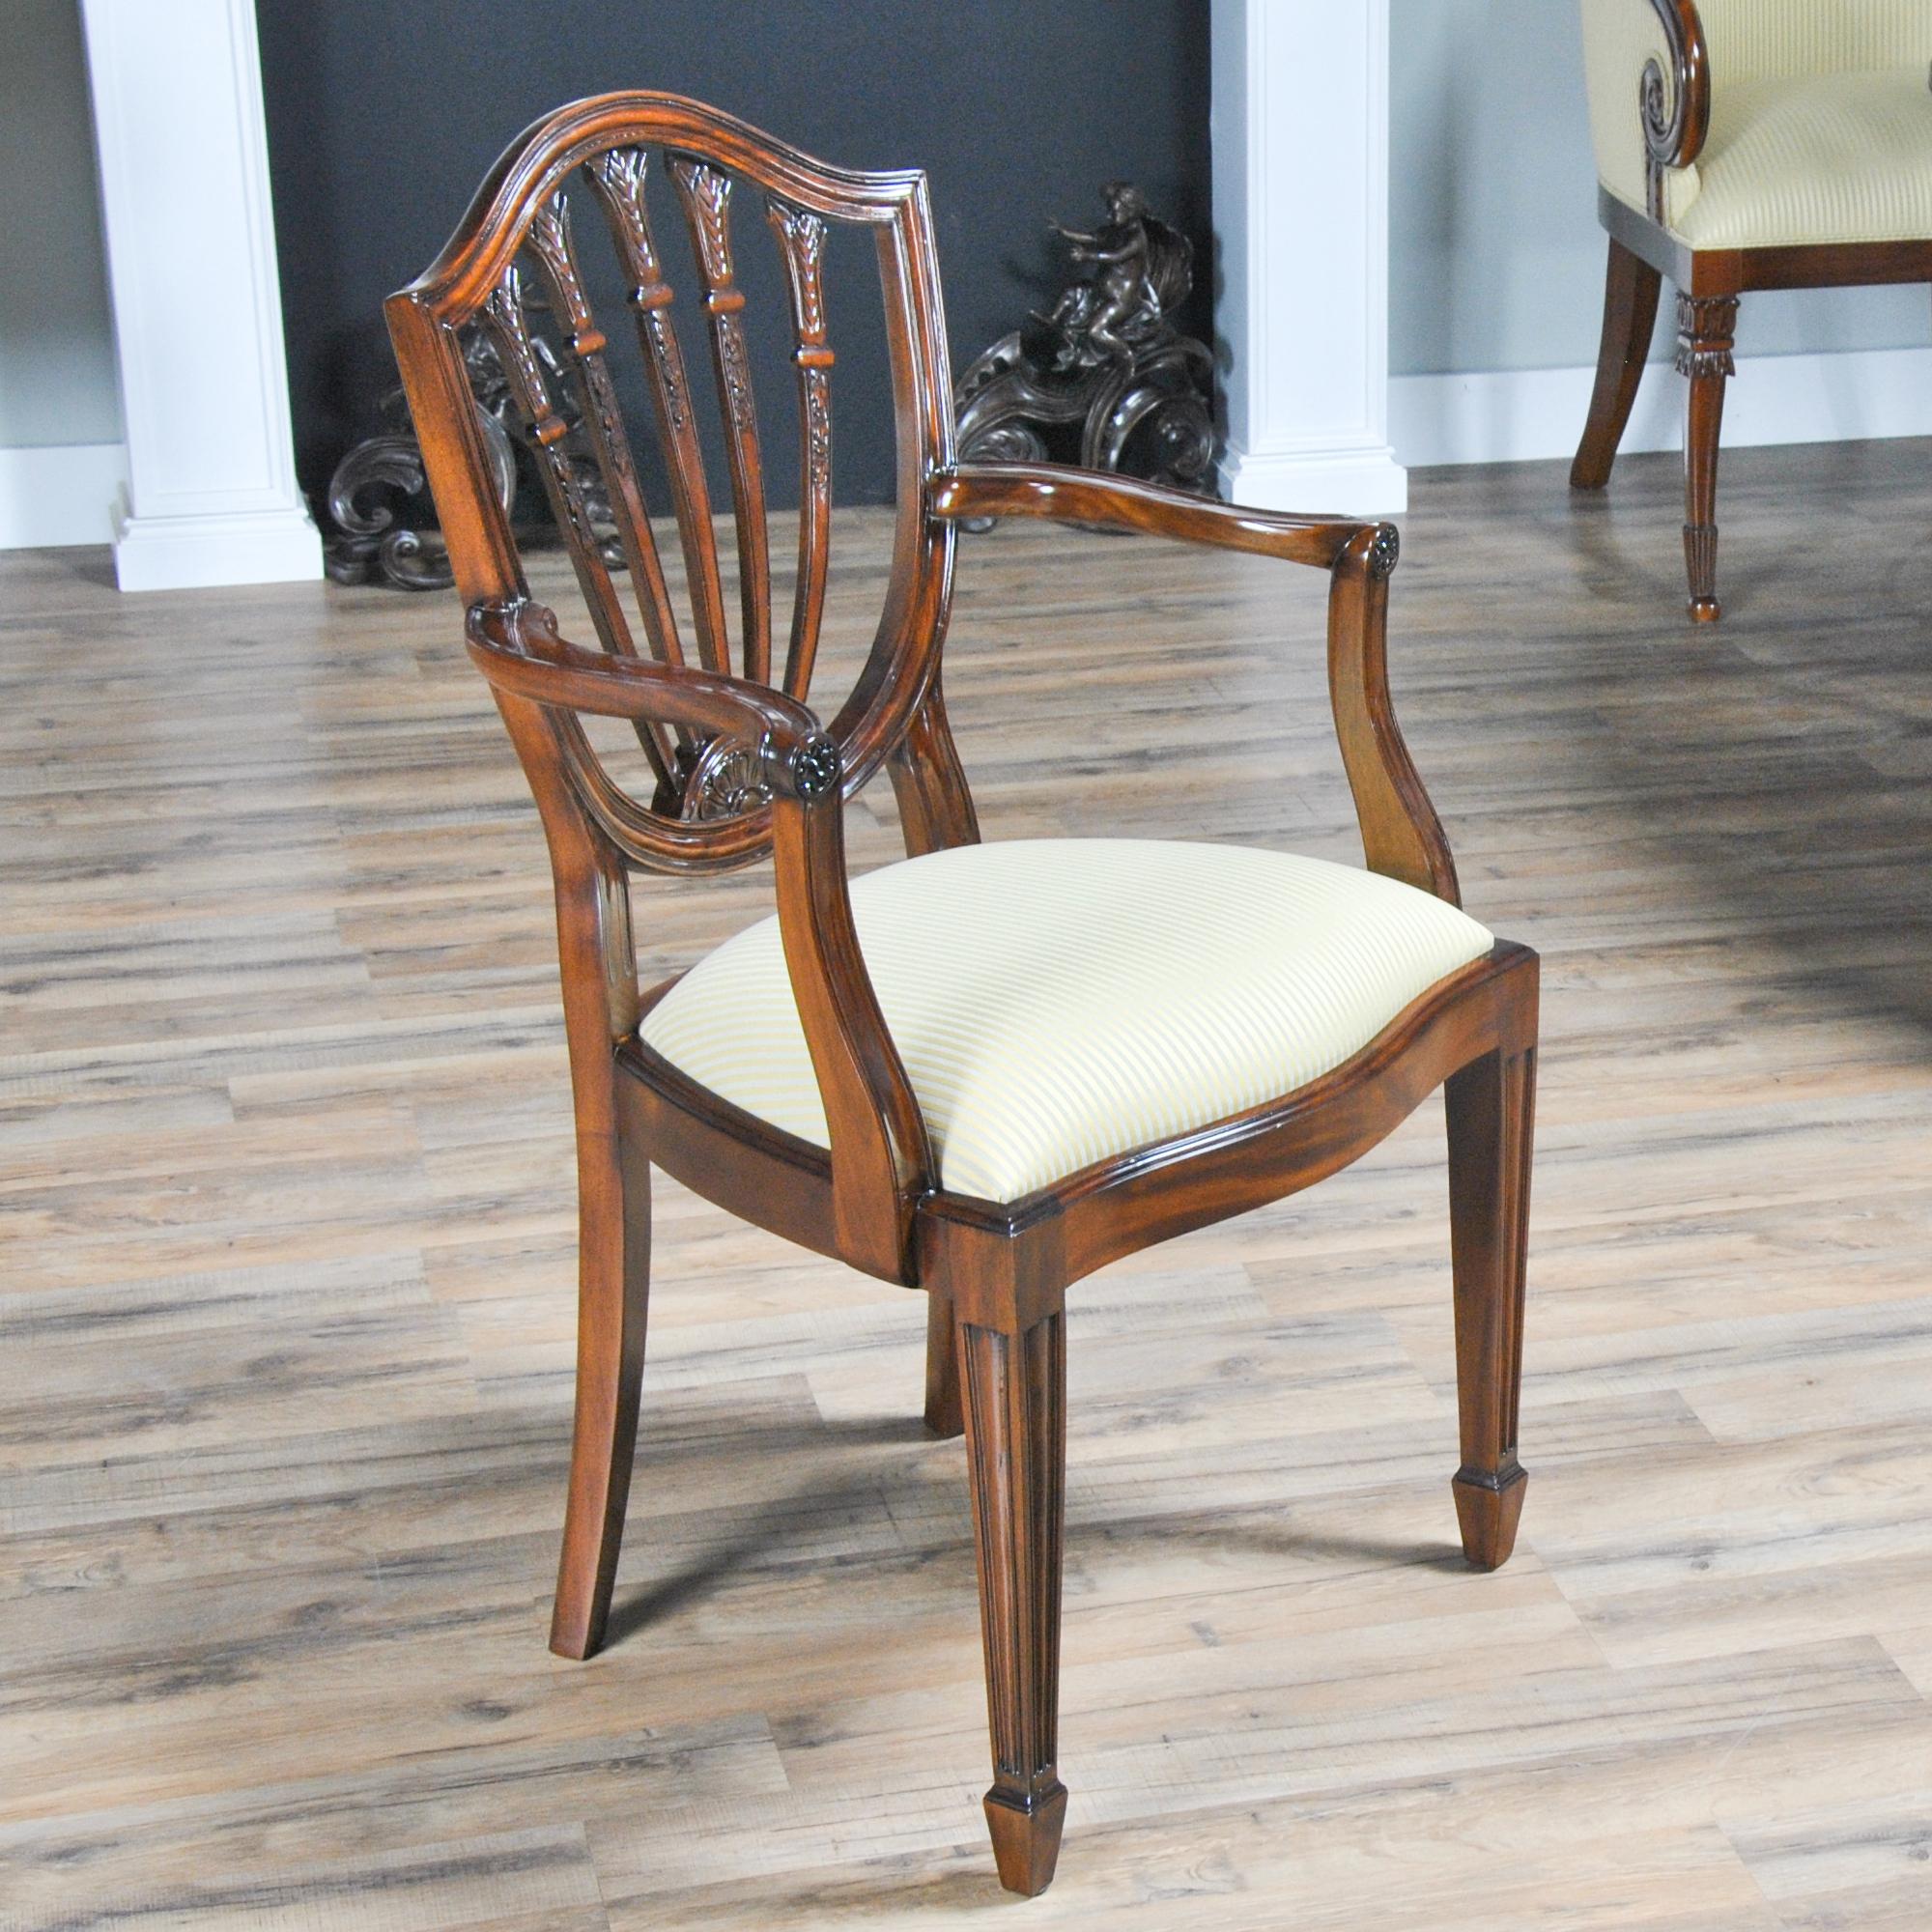 This set of 10 Solid Mahogany, Shield Back Chairs, consist of 2 arm chairs and 8 side chairs. Each chair features a serpentine crest rail which connects to the five section back splat and terminates in a petal carved lunette, all working tougher to